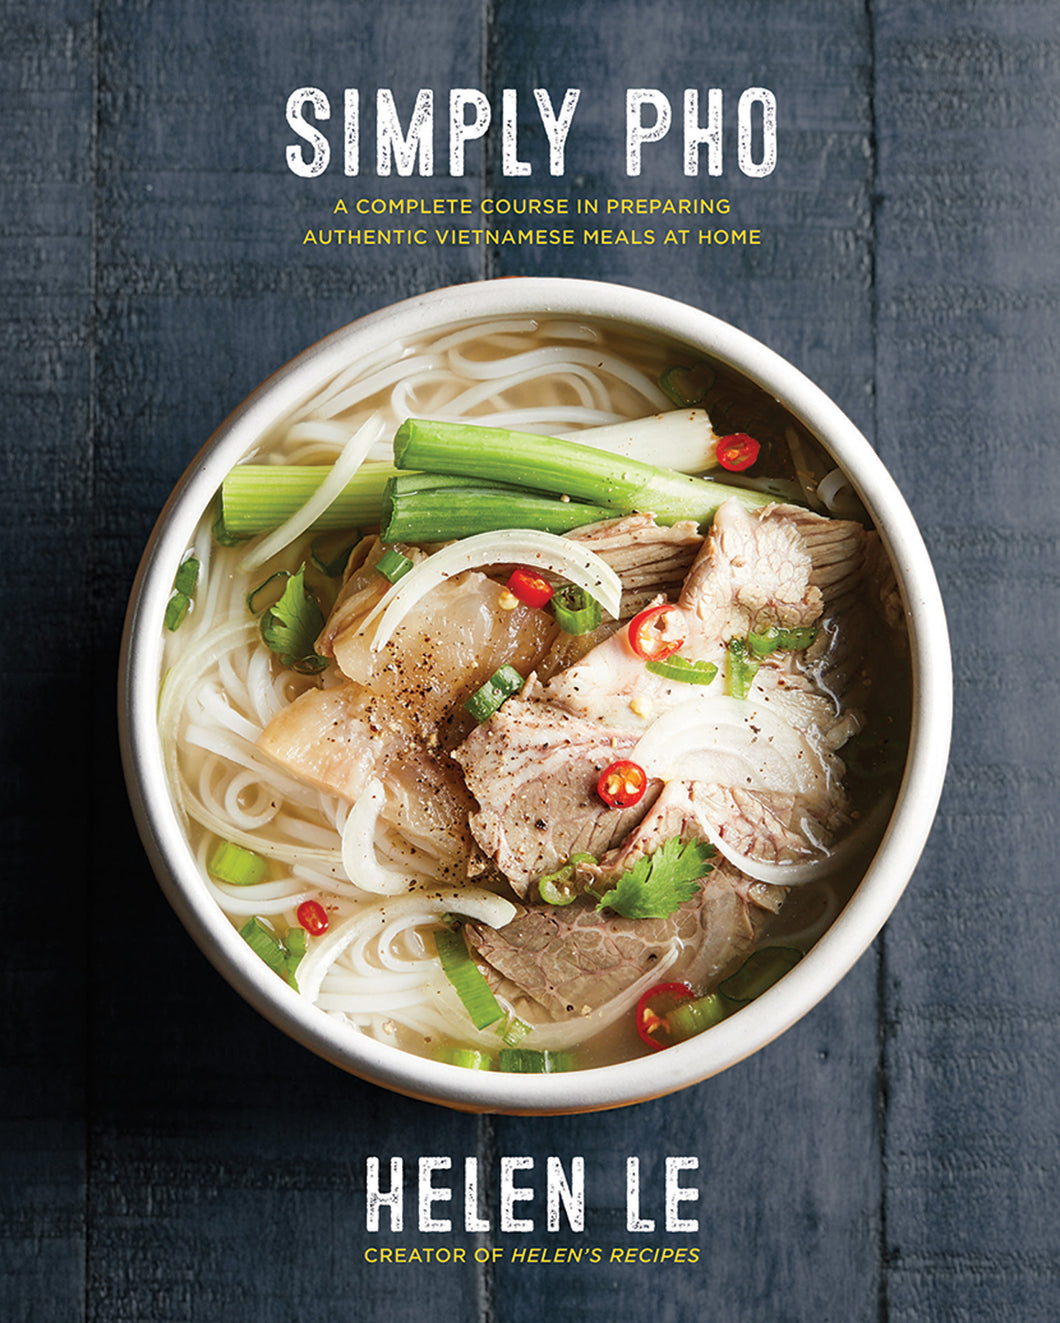 Simple Pho: A Complete Course in Preparing Authentic Vietnamese Meals at Home